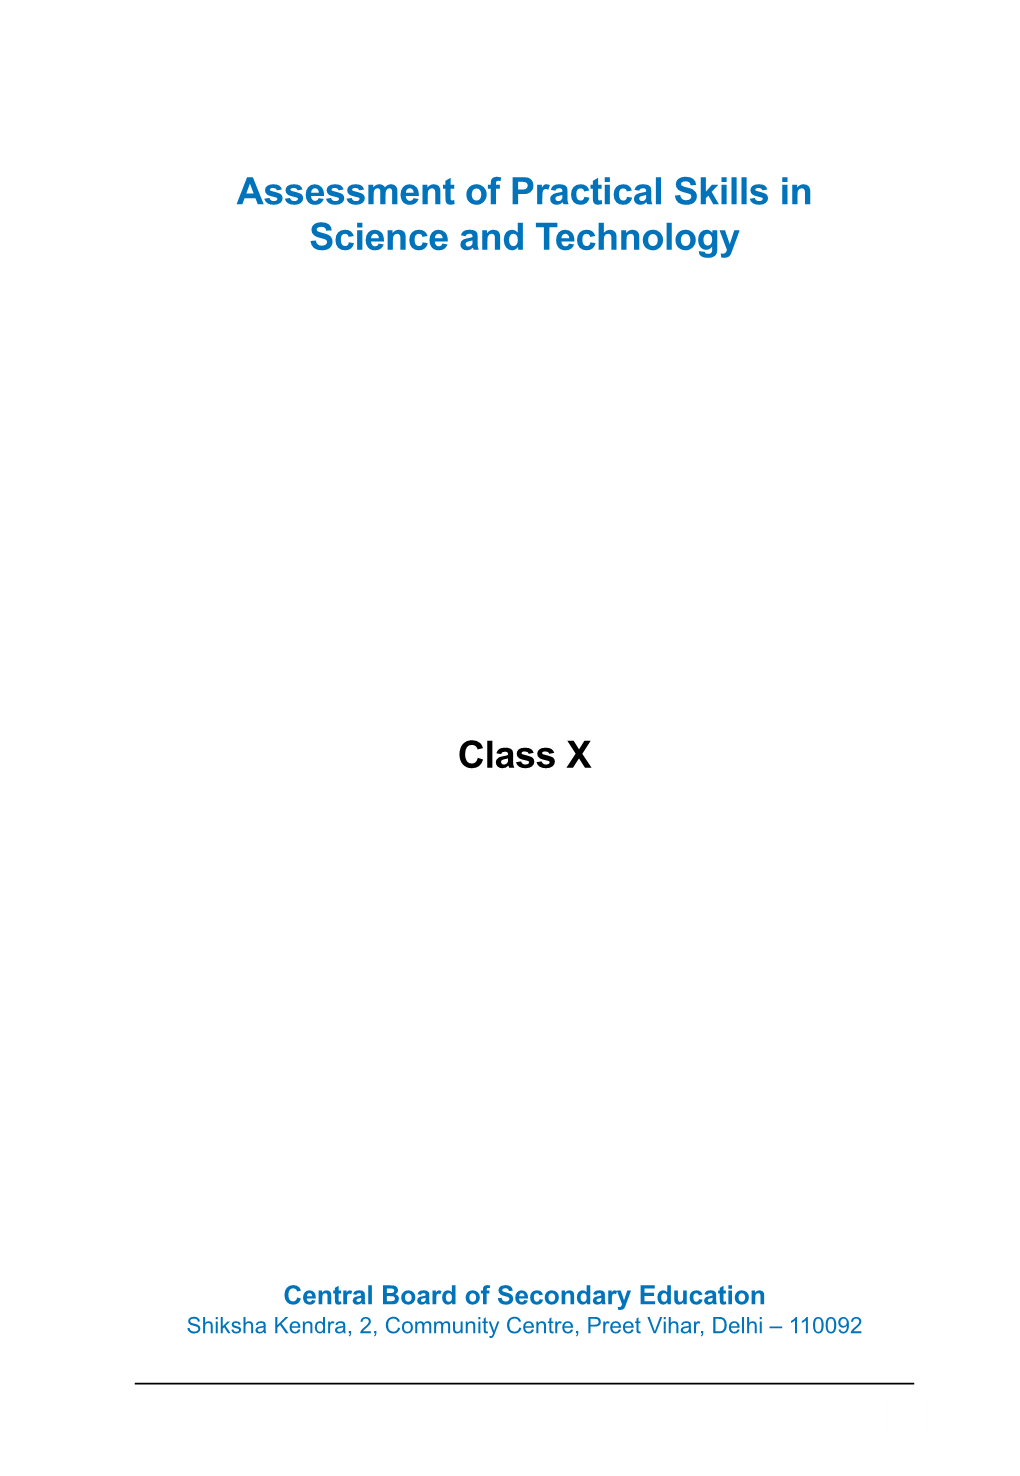 Assessment of Practical Skills in Science and Technology Class X